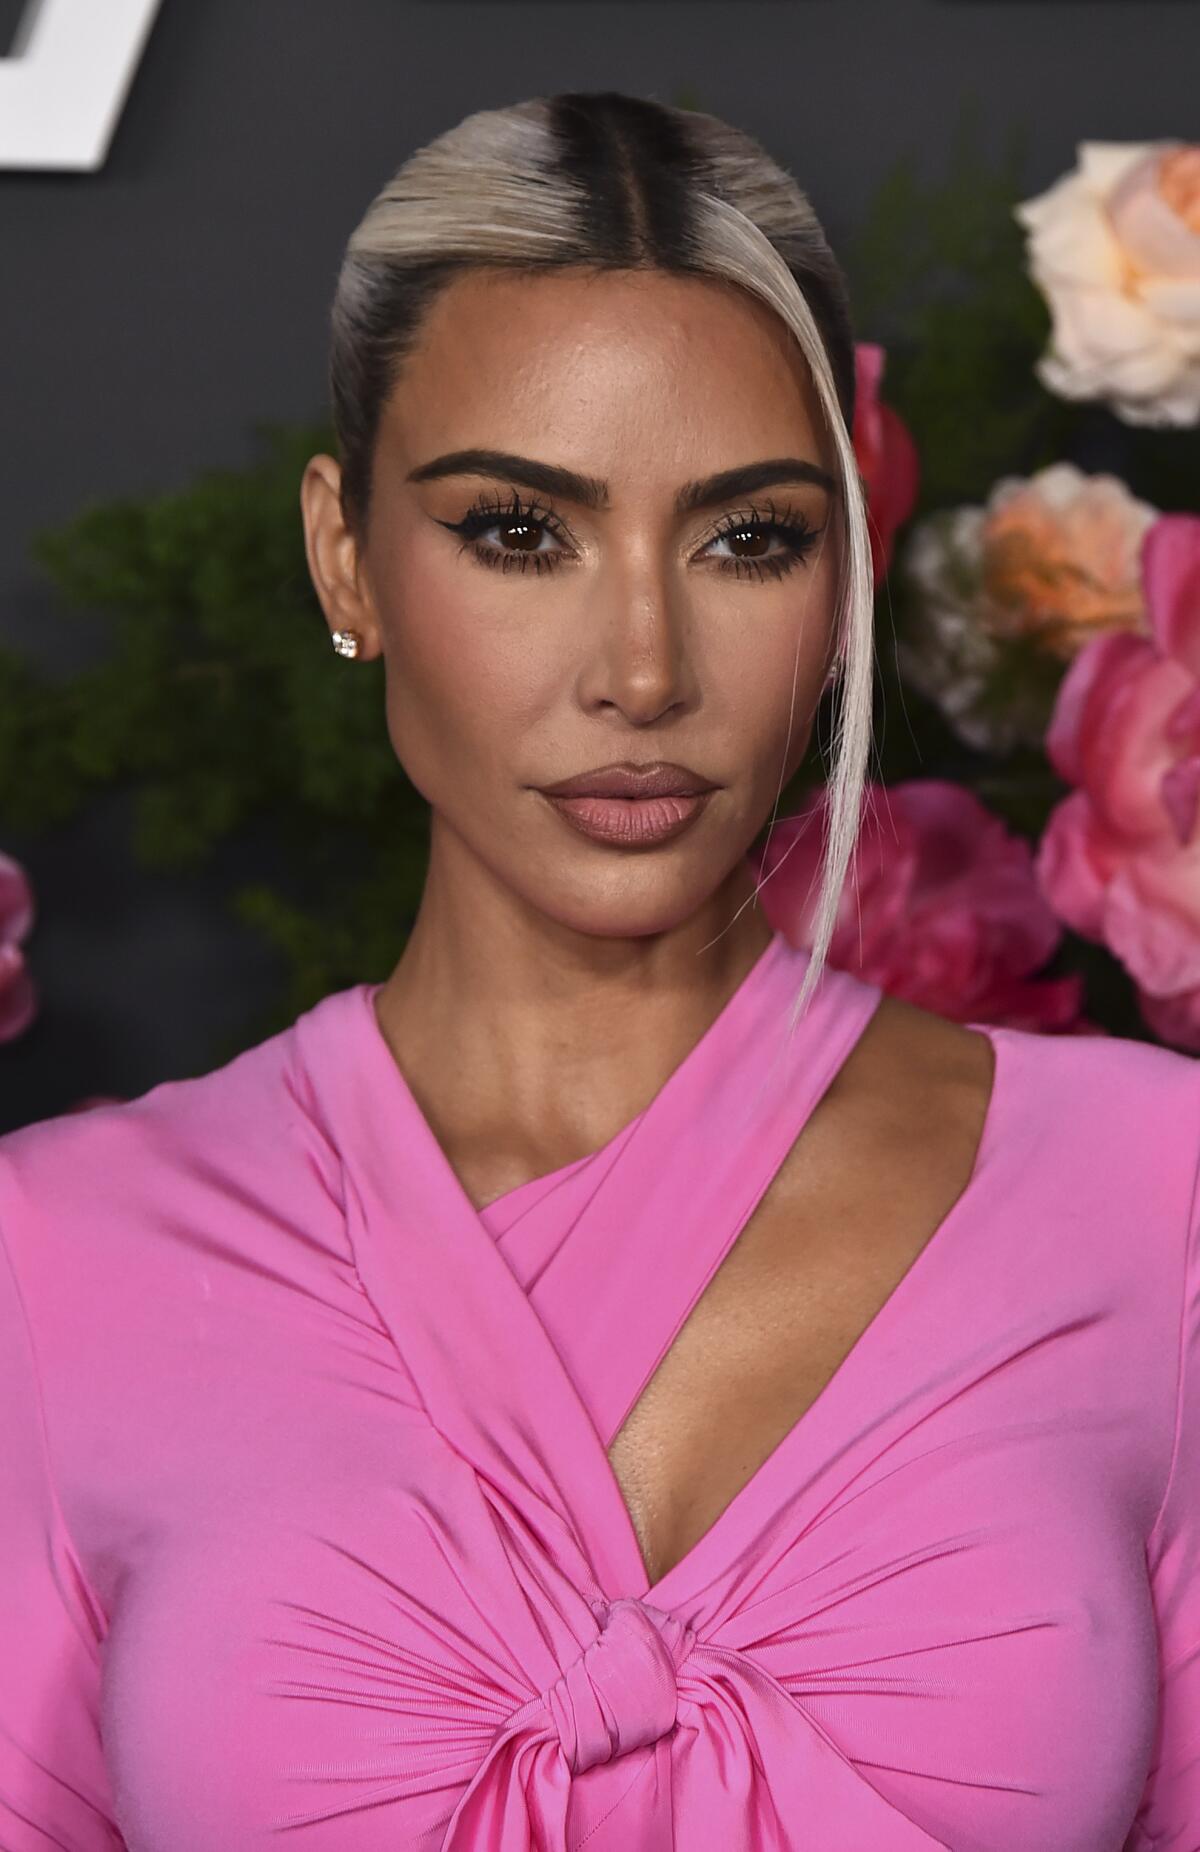 Kim Kardashian poses in a hot pink top with bleached streaks in her hair